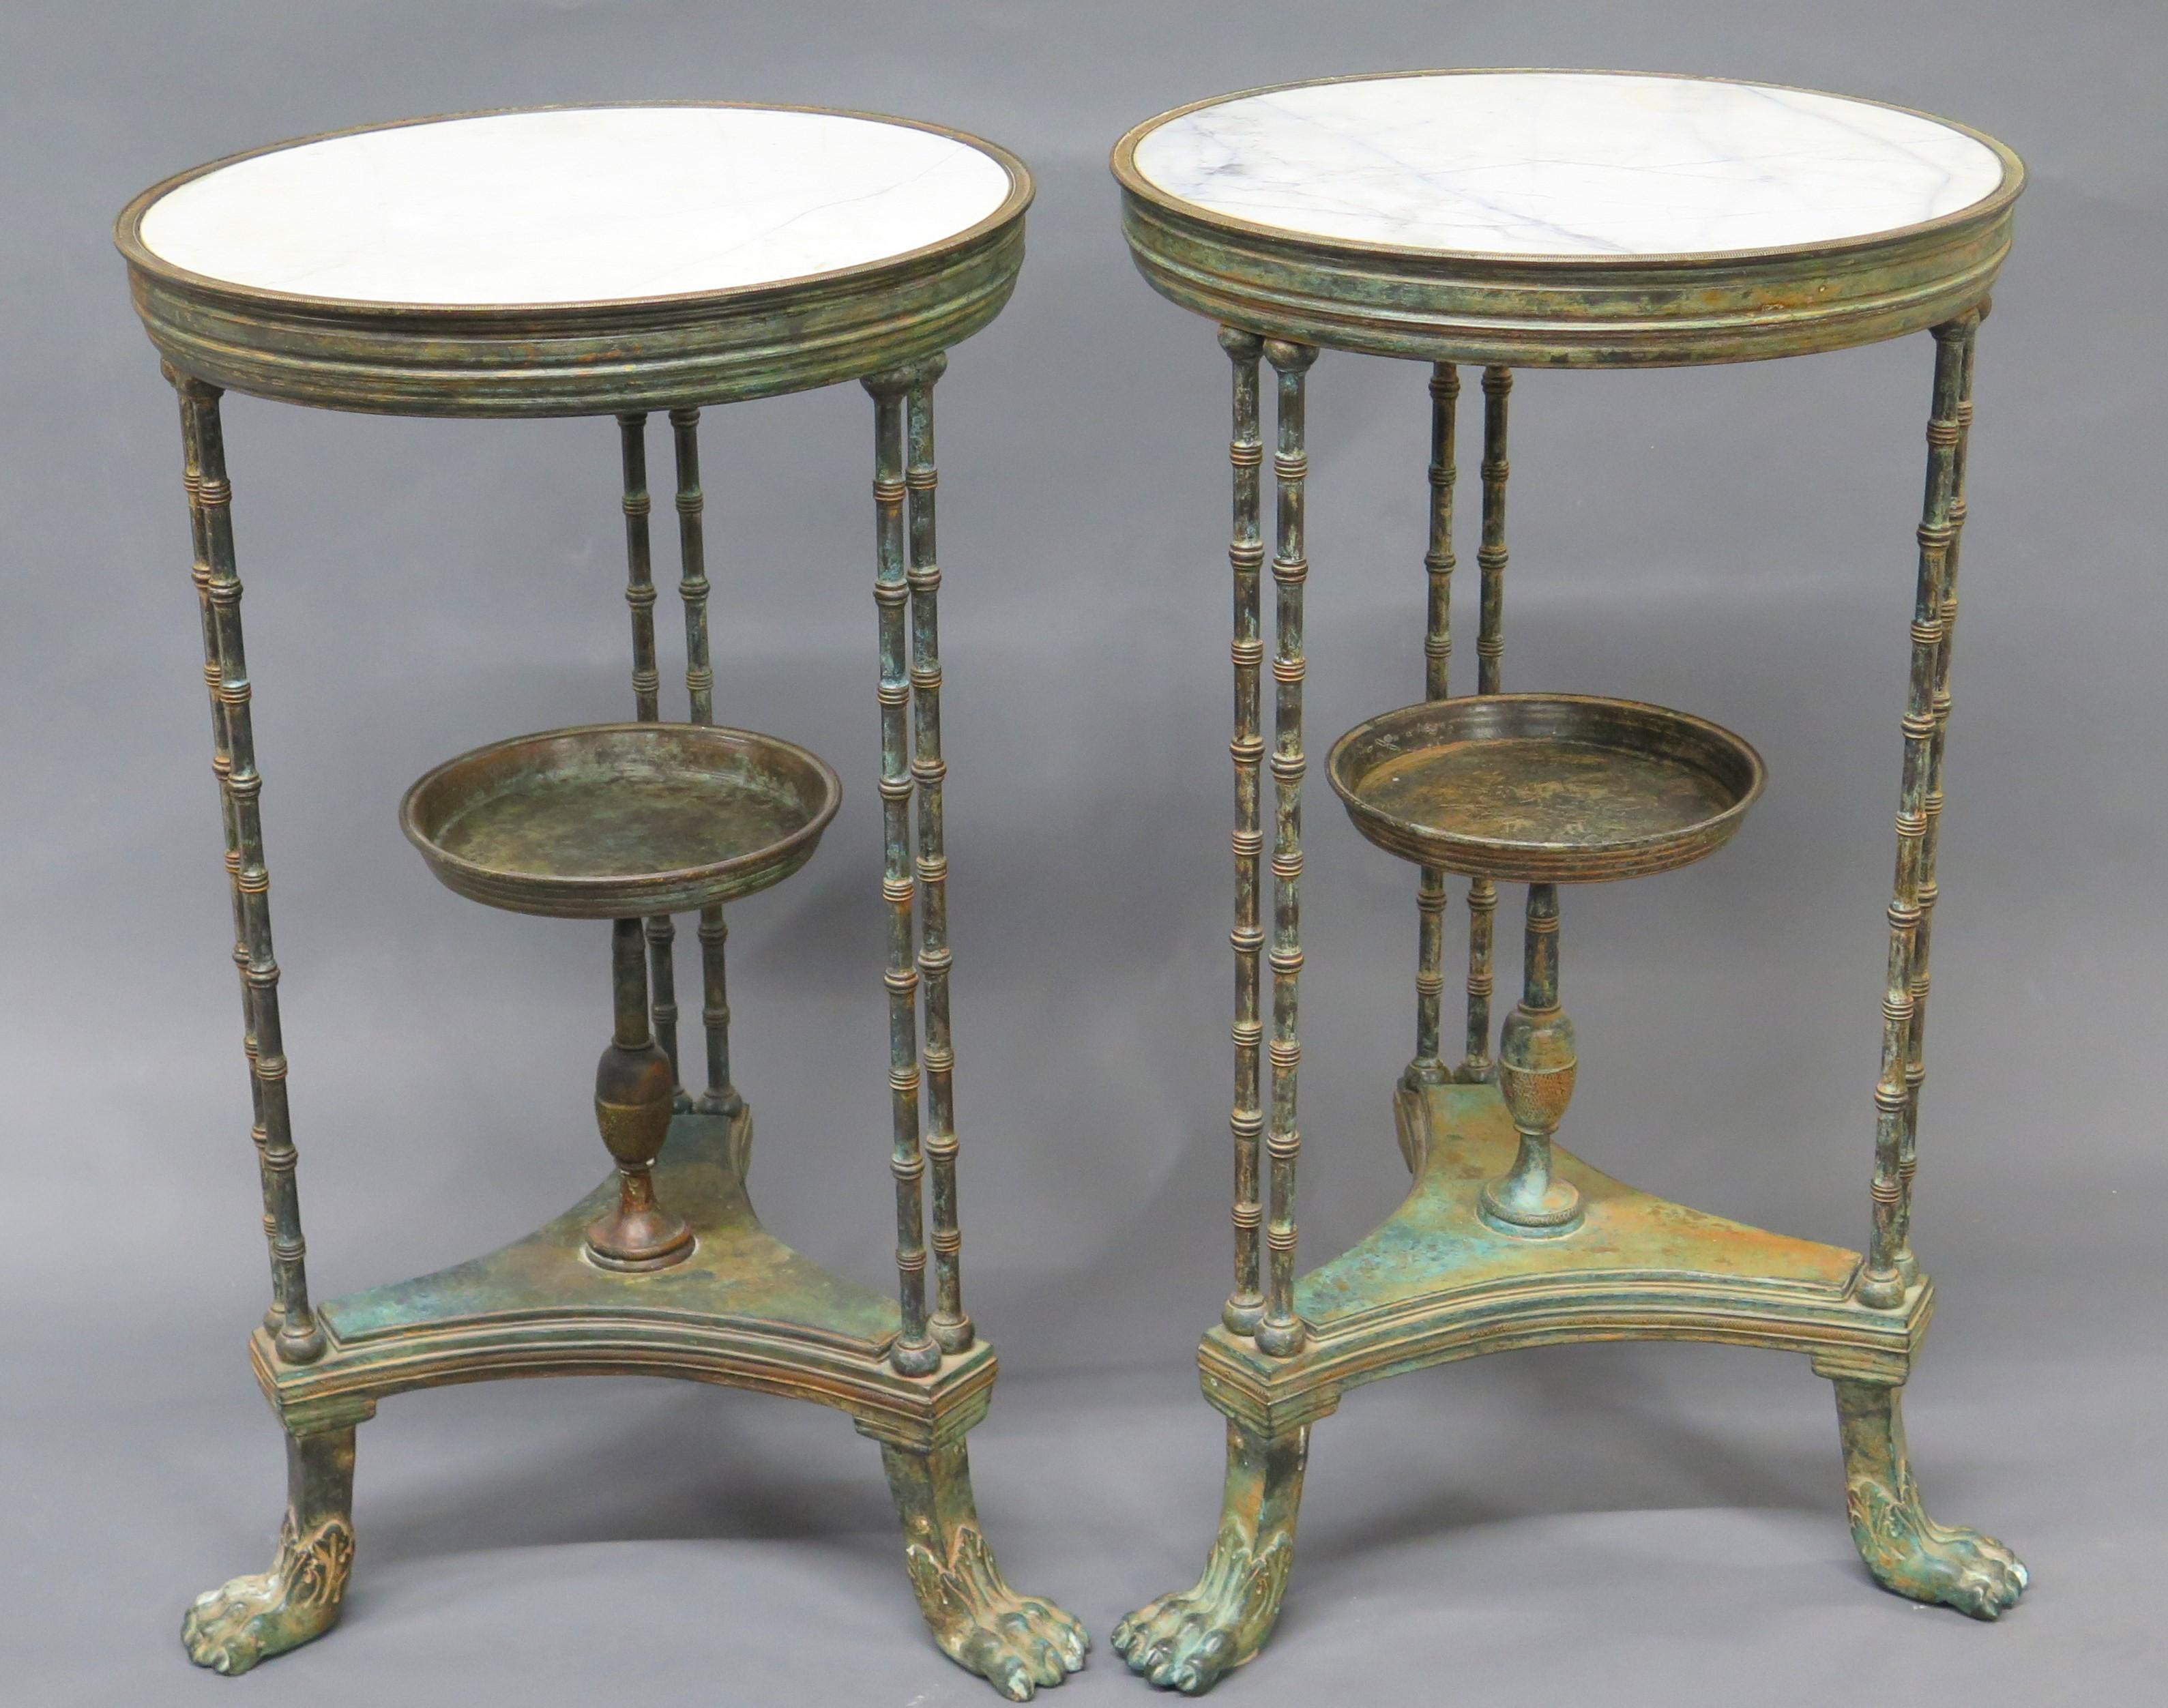 Pair of Louis XVI-Style Patinated Bronze Gueridons (Tables) For Sale 10